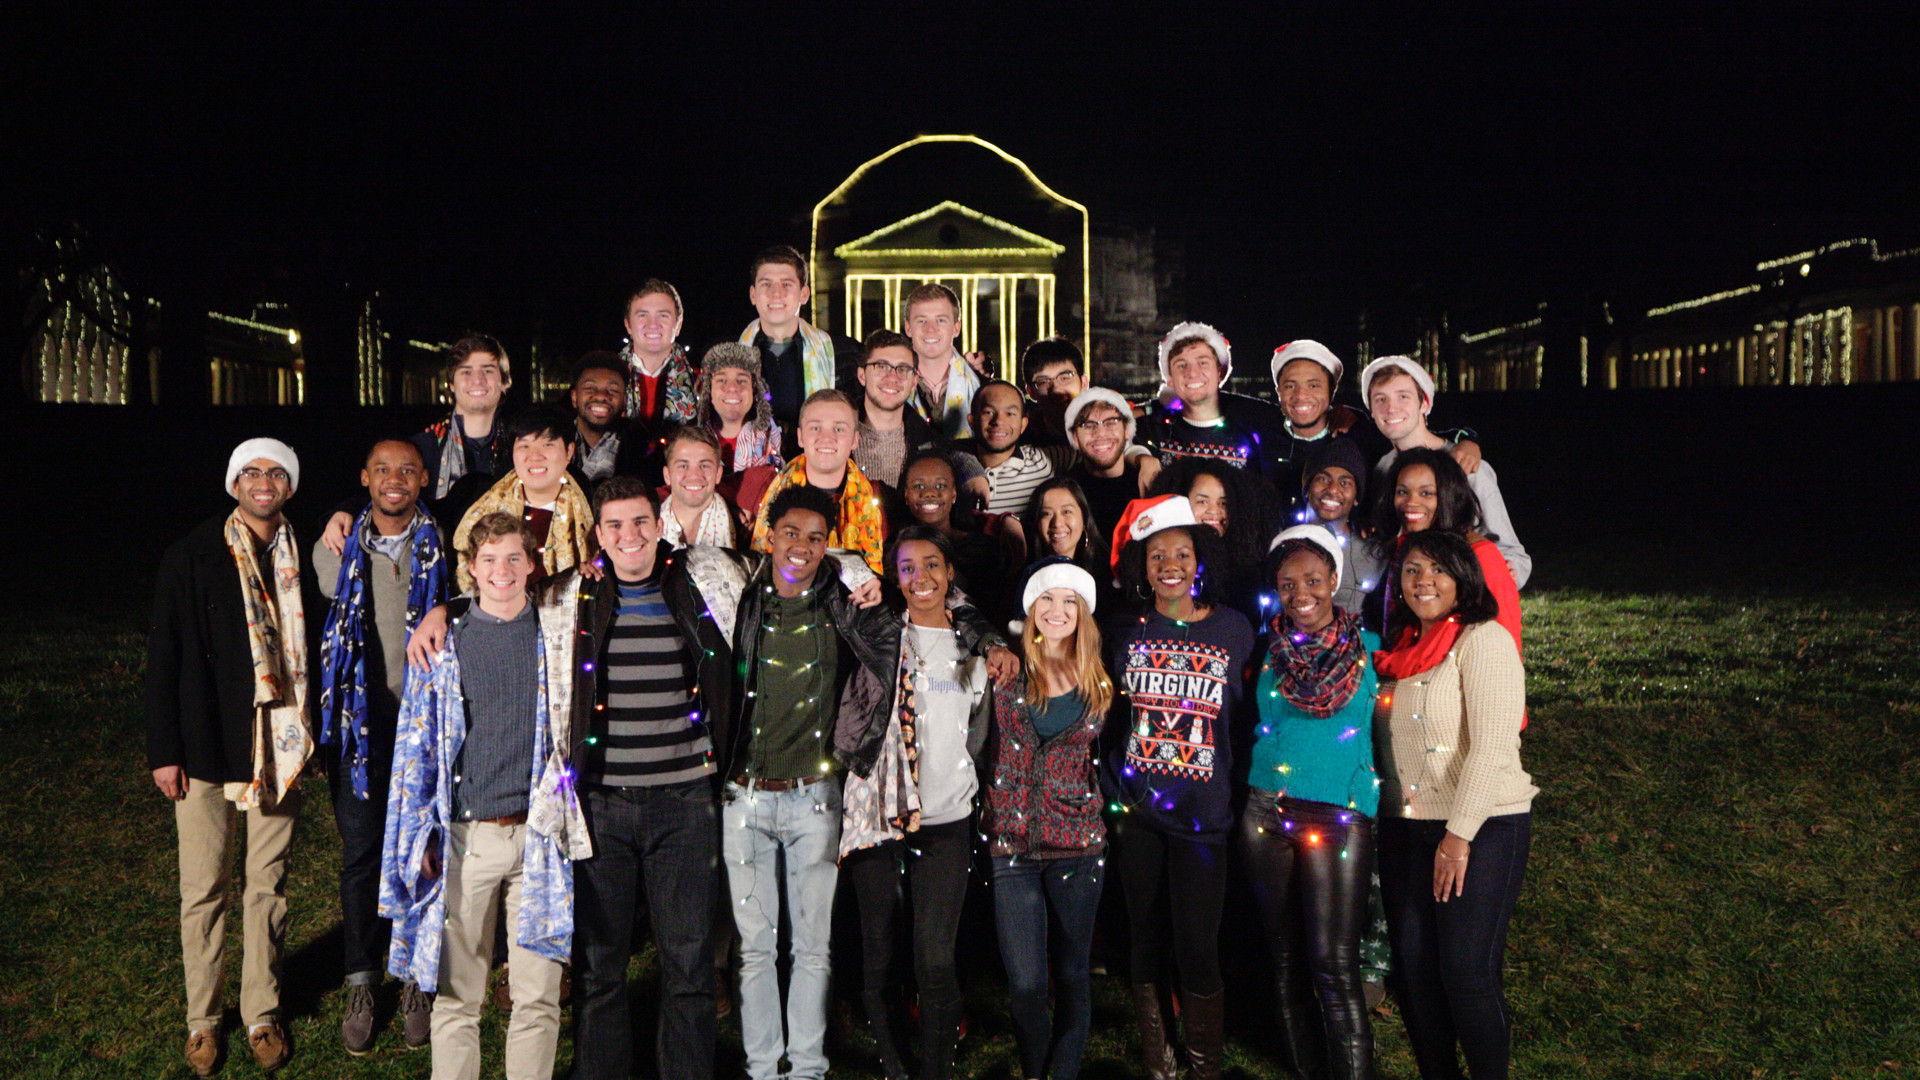 Group photo of students decked out in Holiday lights and attired with the Rotunda behind them outlined in lights